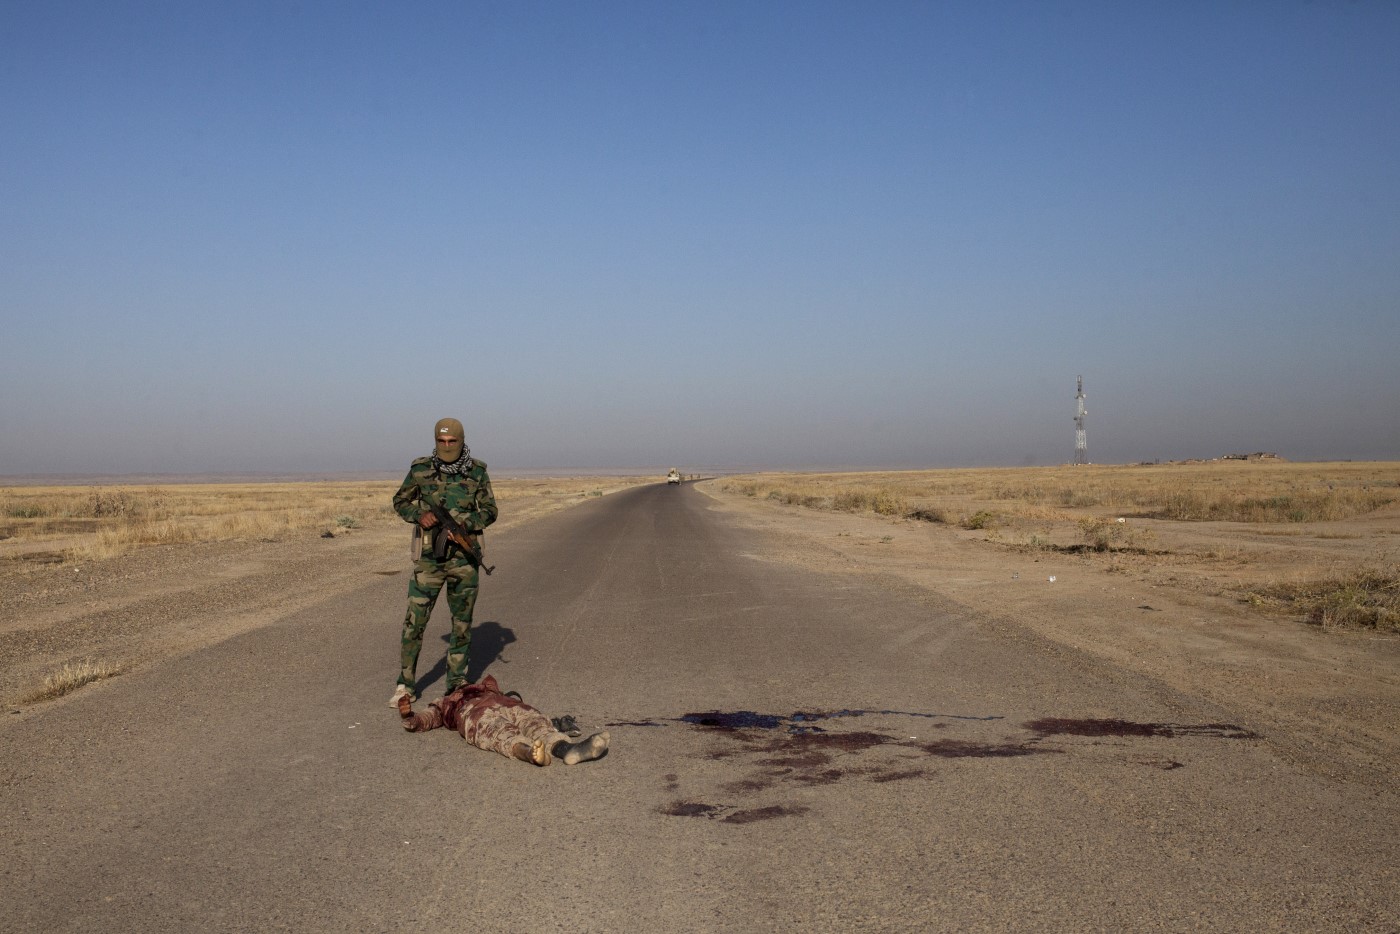 Peshmerga in front of the lifeless body of a member of the Islamic State a few minutes after the attack of the front line. Tuzkhurmatu, Kurdistan, Iraq. June 20, 2017